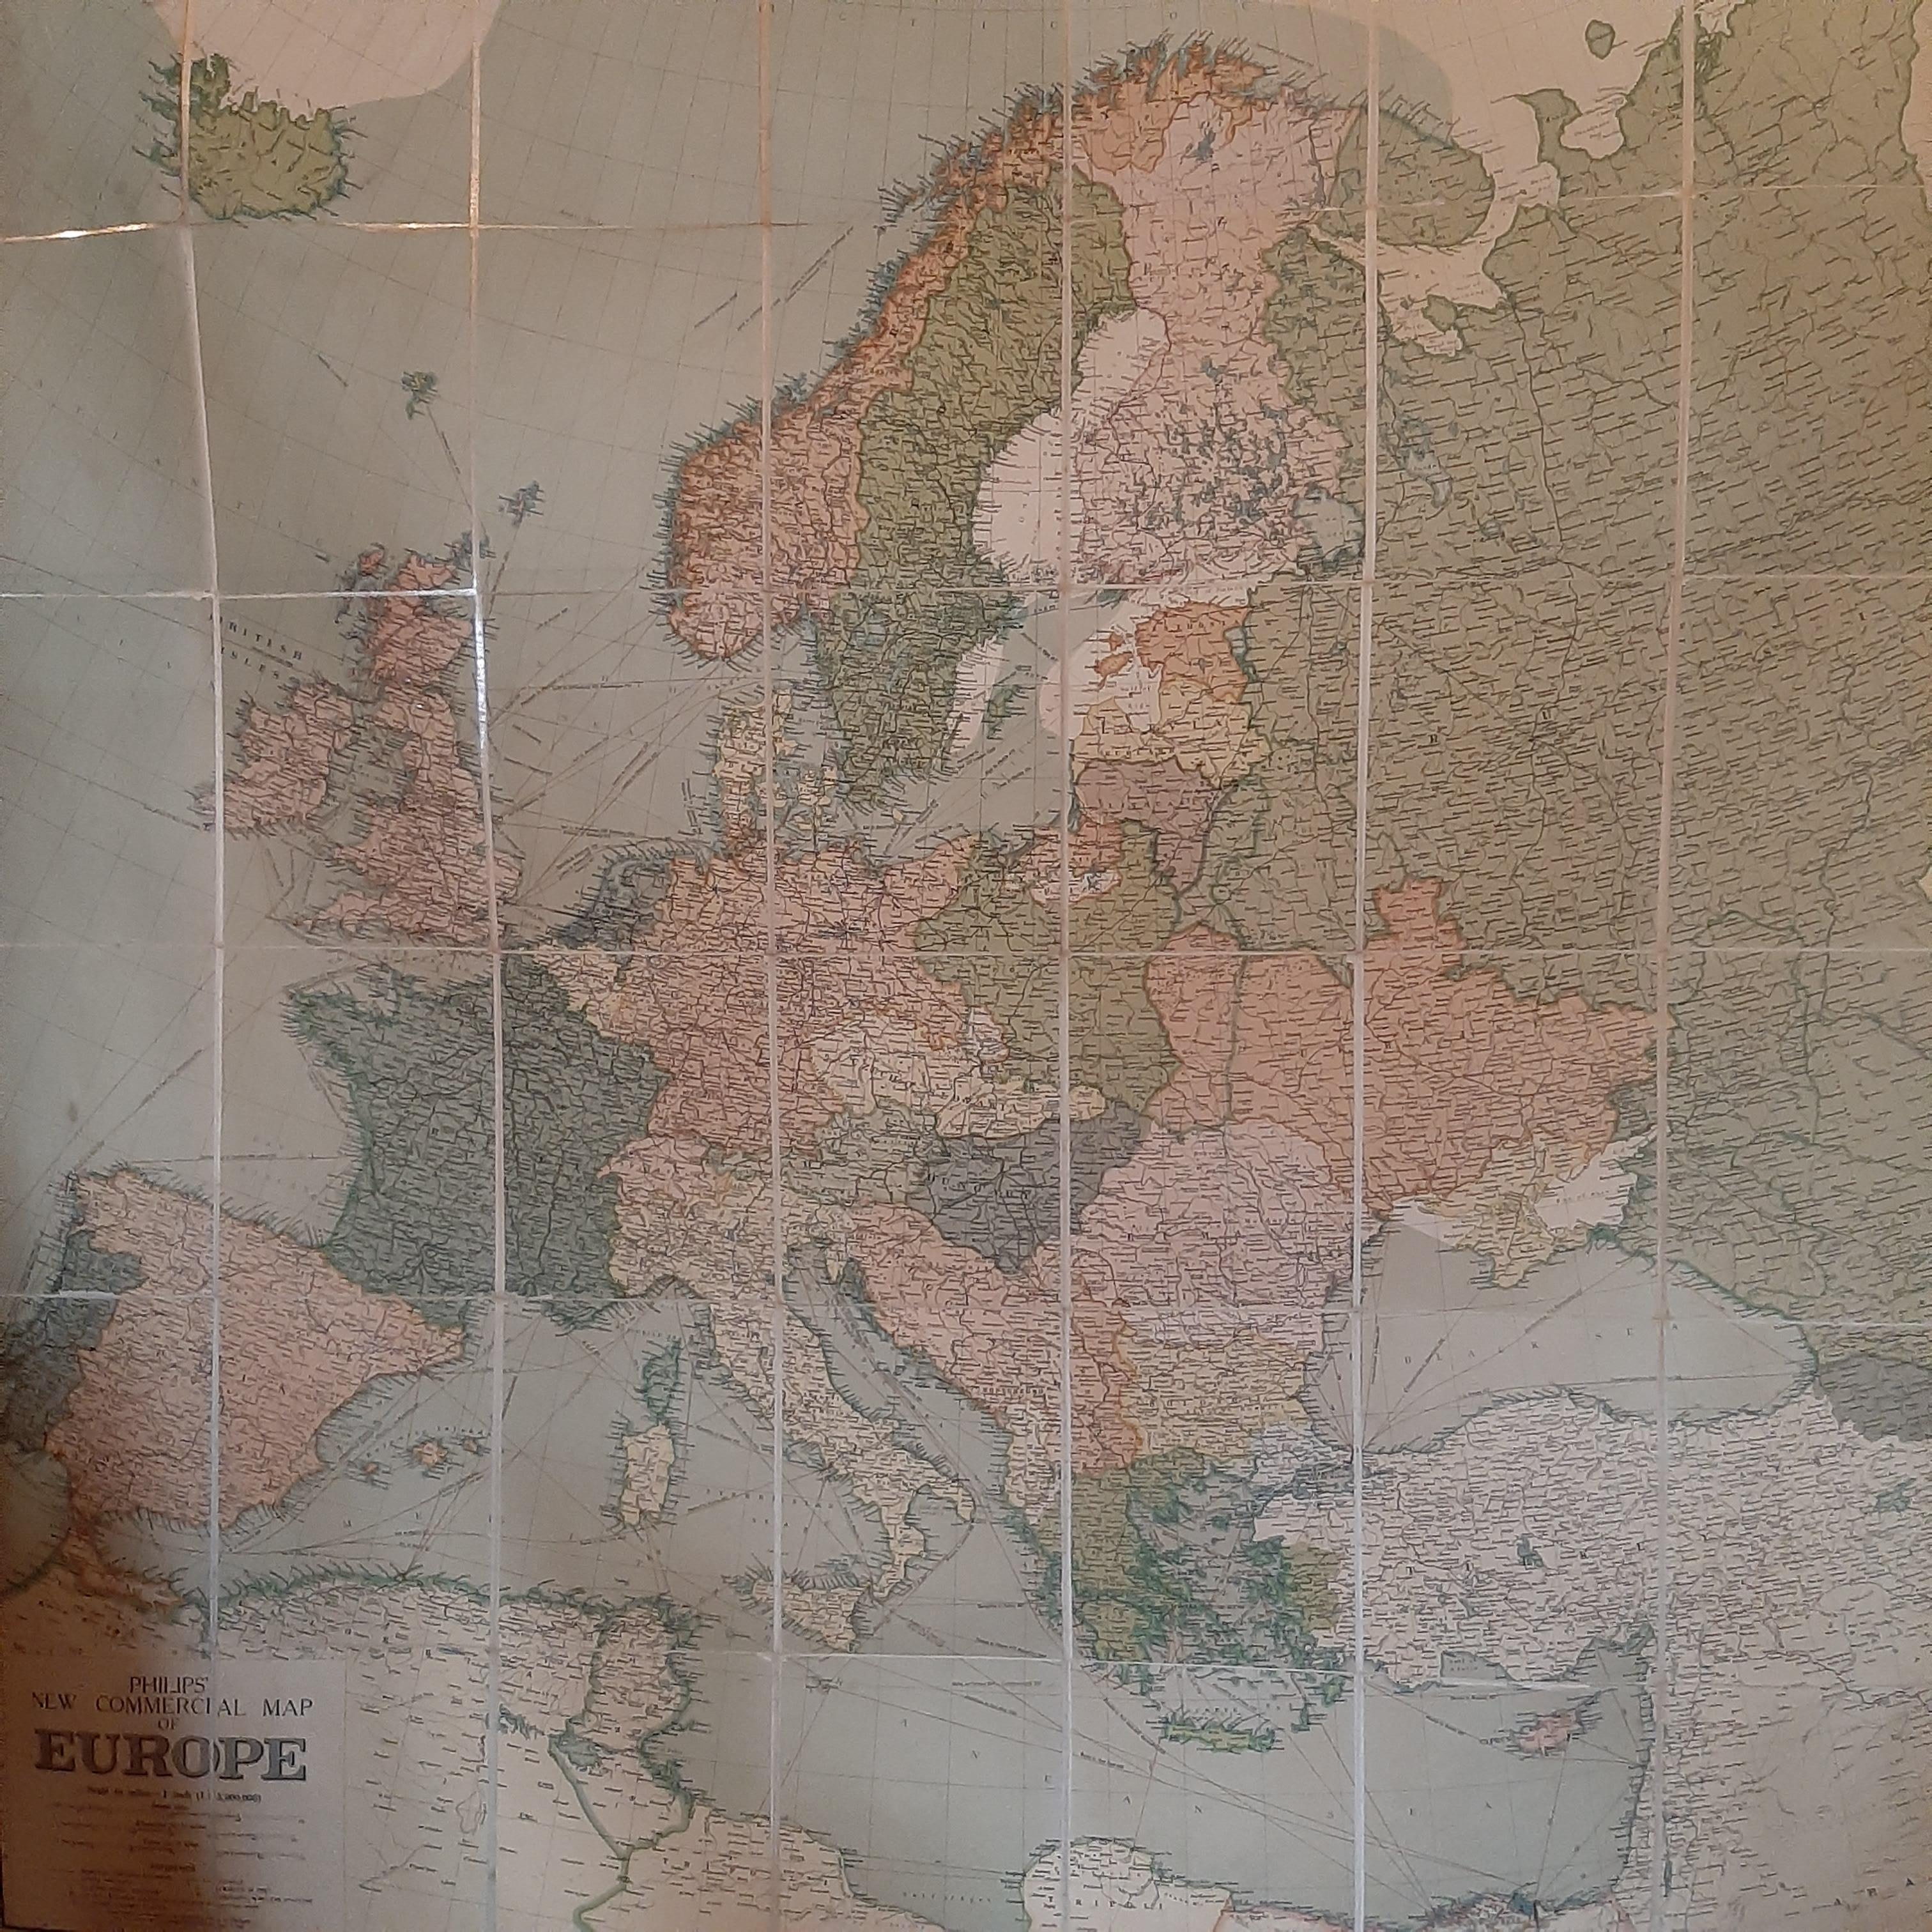 Antique map titled 'Philips' New Commercial Map of Europe'. Very large wall map of Europe including the North African coast and Turkey. Decorative borders. Dissected into 48 segments and mounted on linen, folding into original boards. Published by